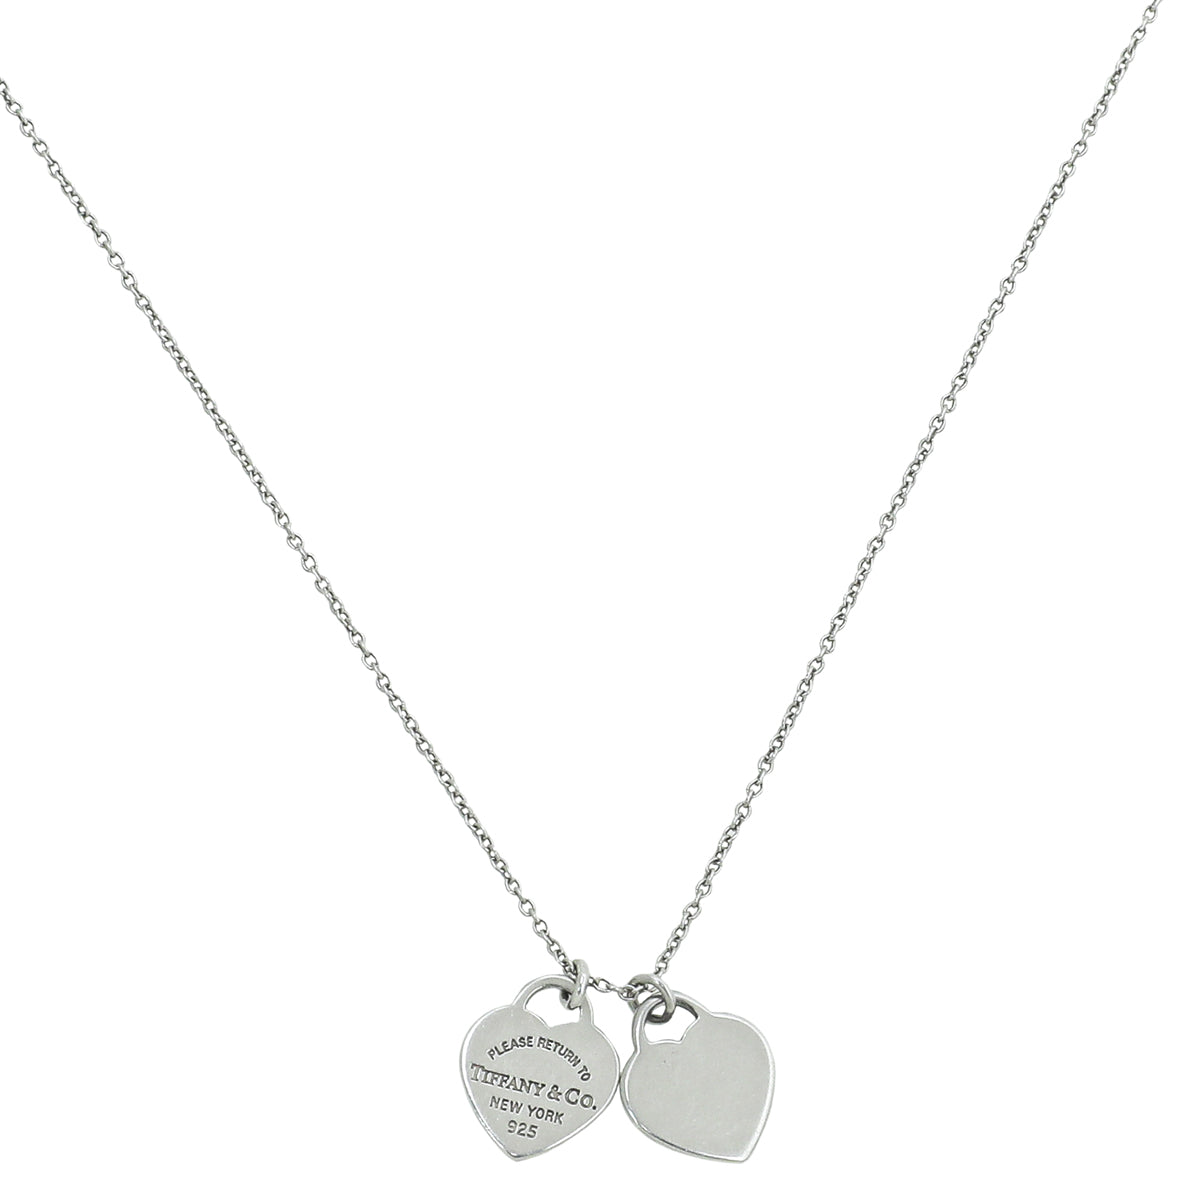 Tiffany & Co. Sterling Silver Double Mini Heart Tag Necklace